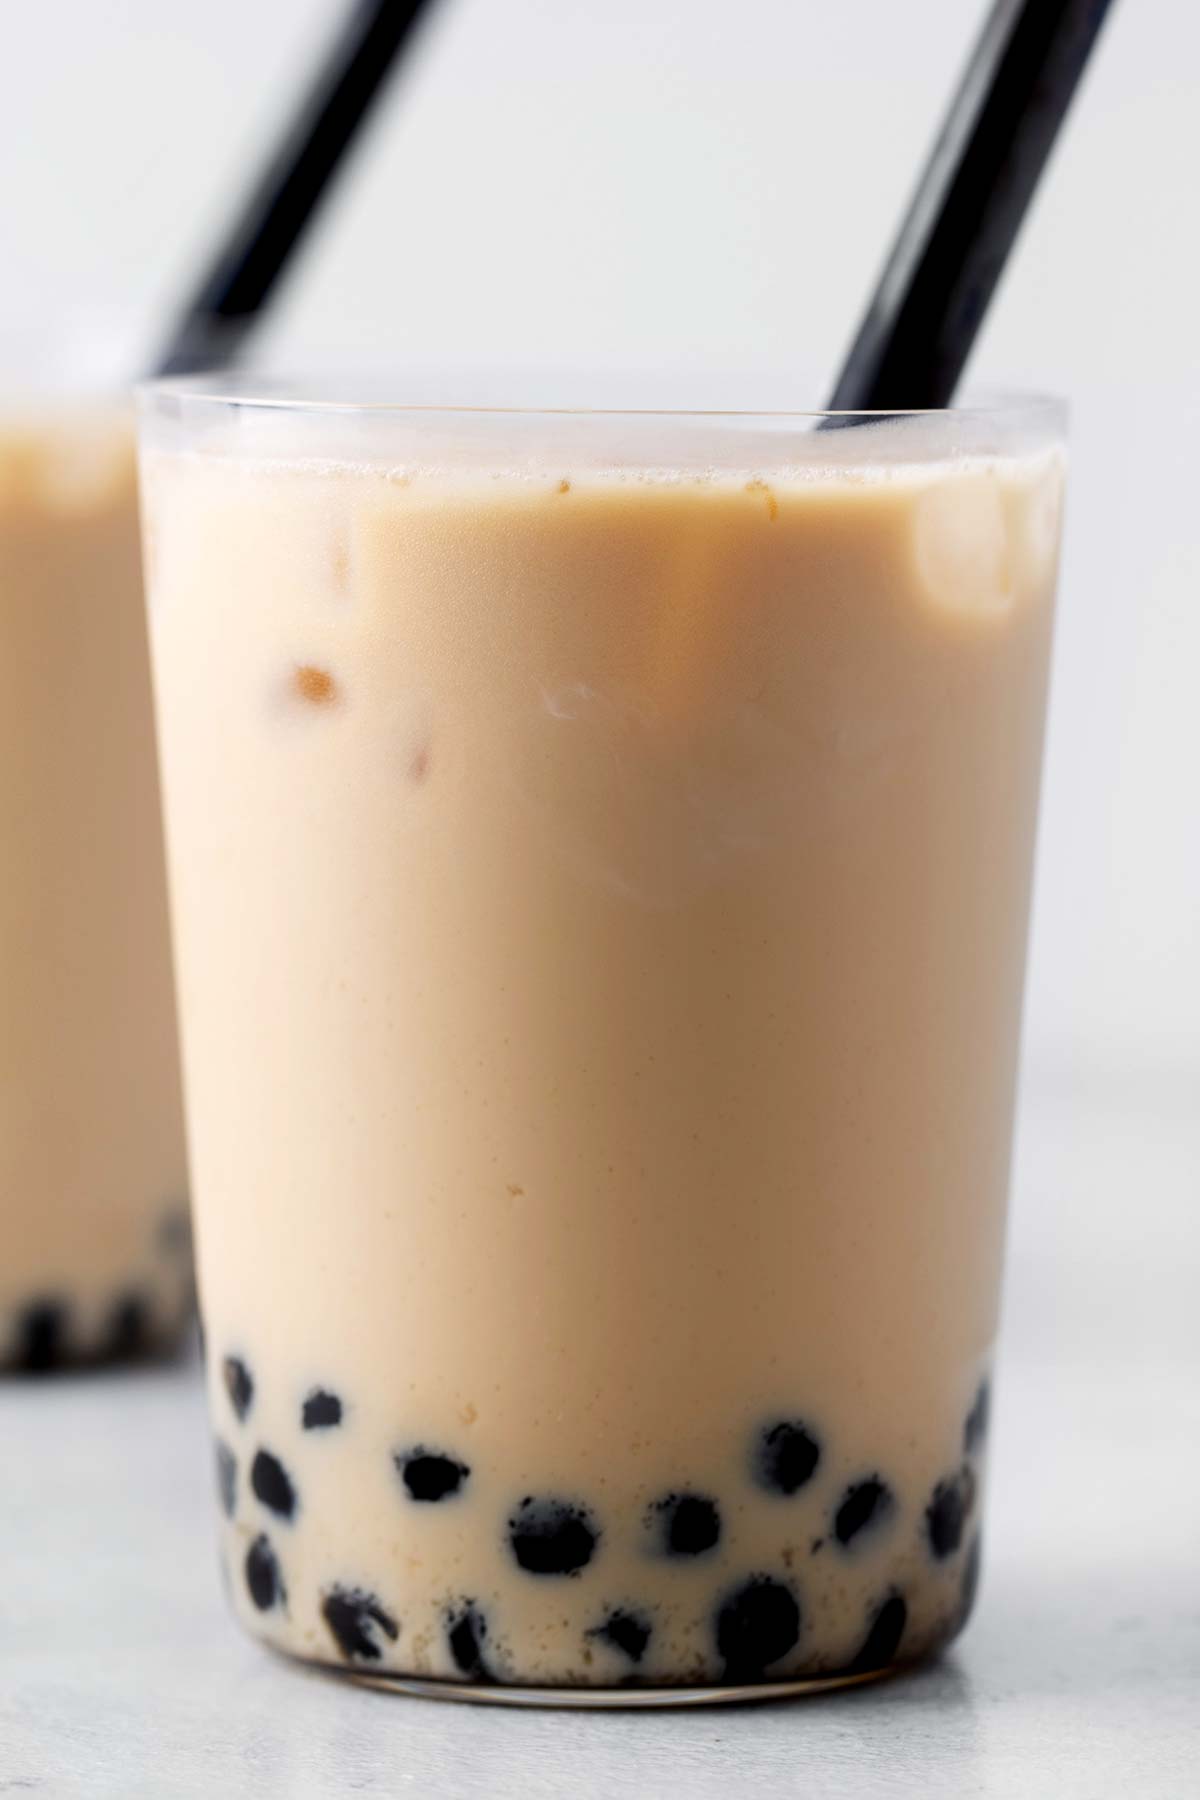 Homemade bubble tea in a cup with a black straw.